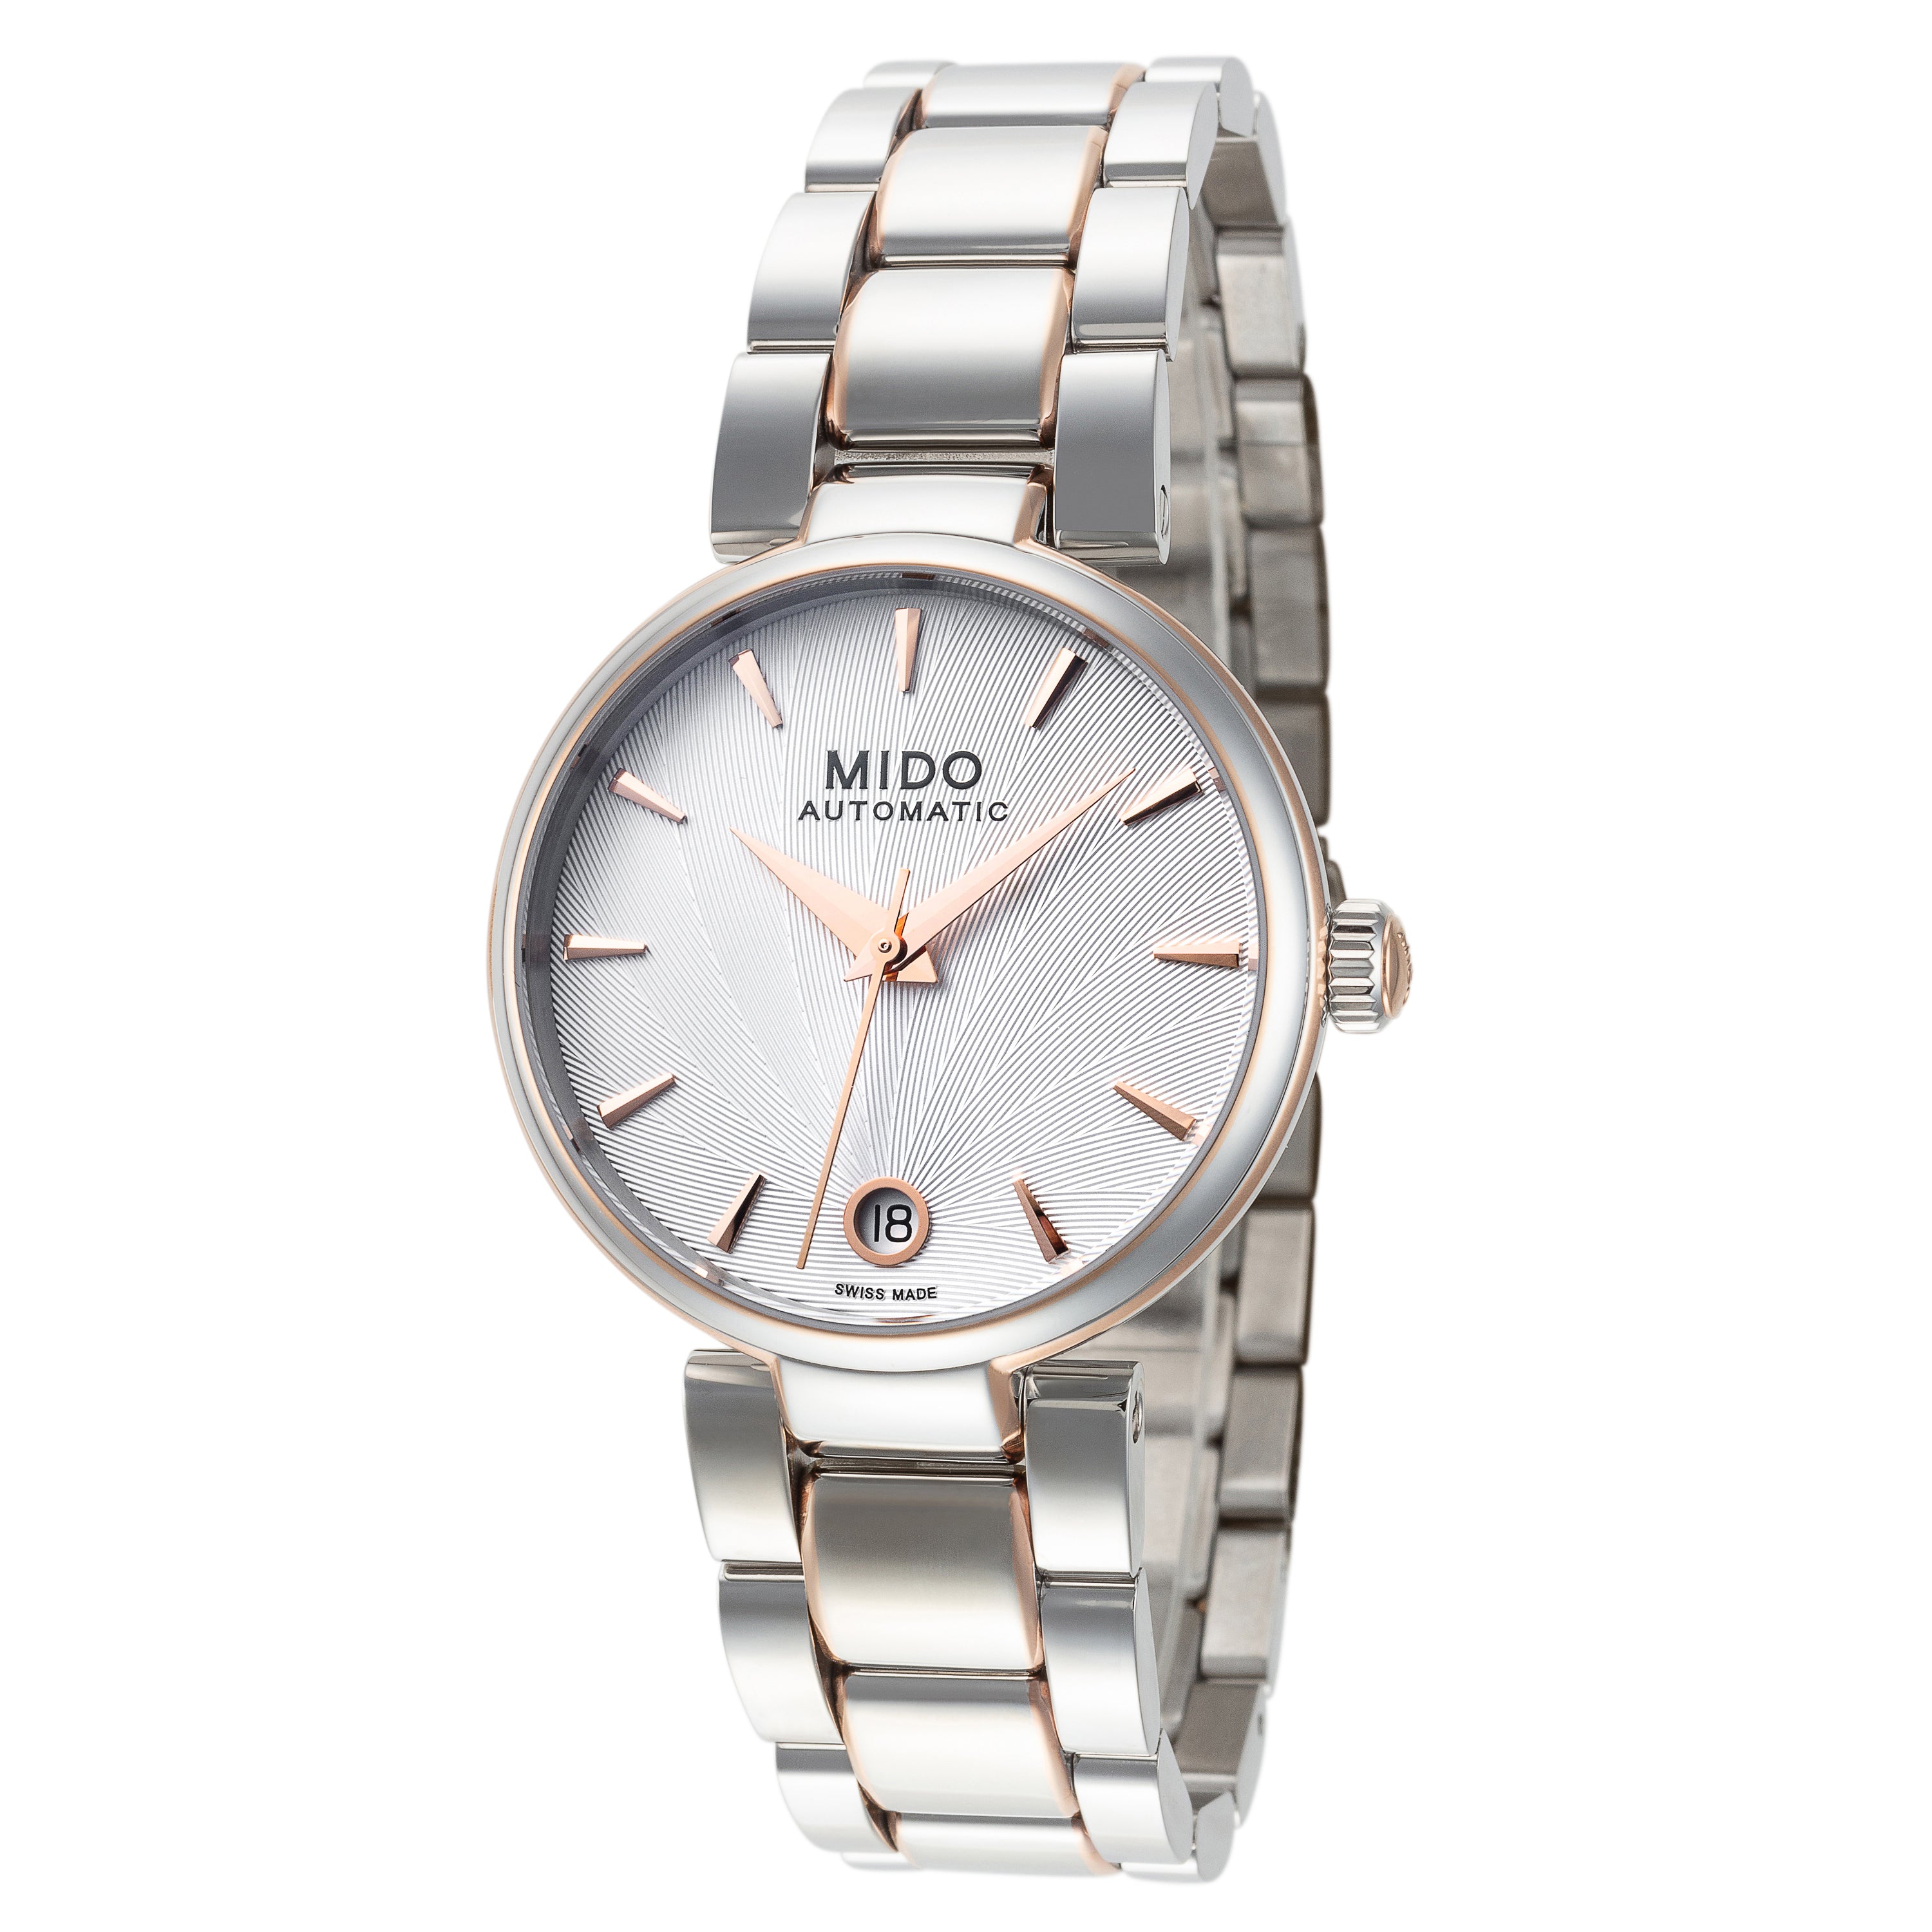 title:Mido Women's M0222072203111 Baroncelli II Donna 33mm Automatic Watch;color:Silver